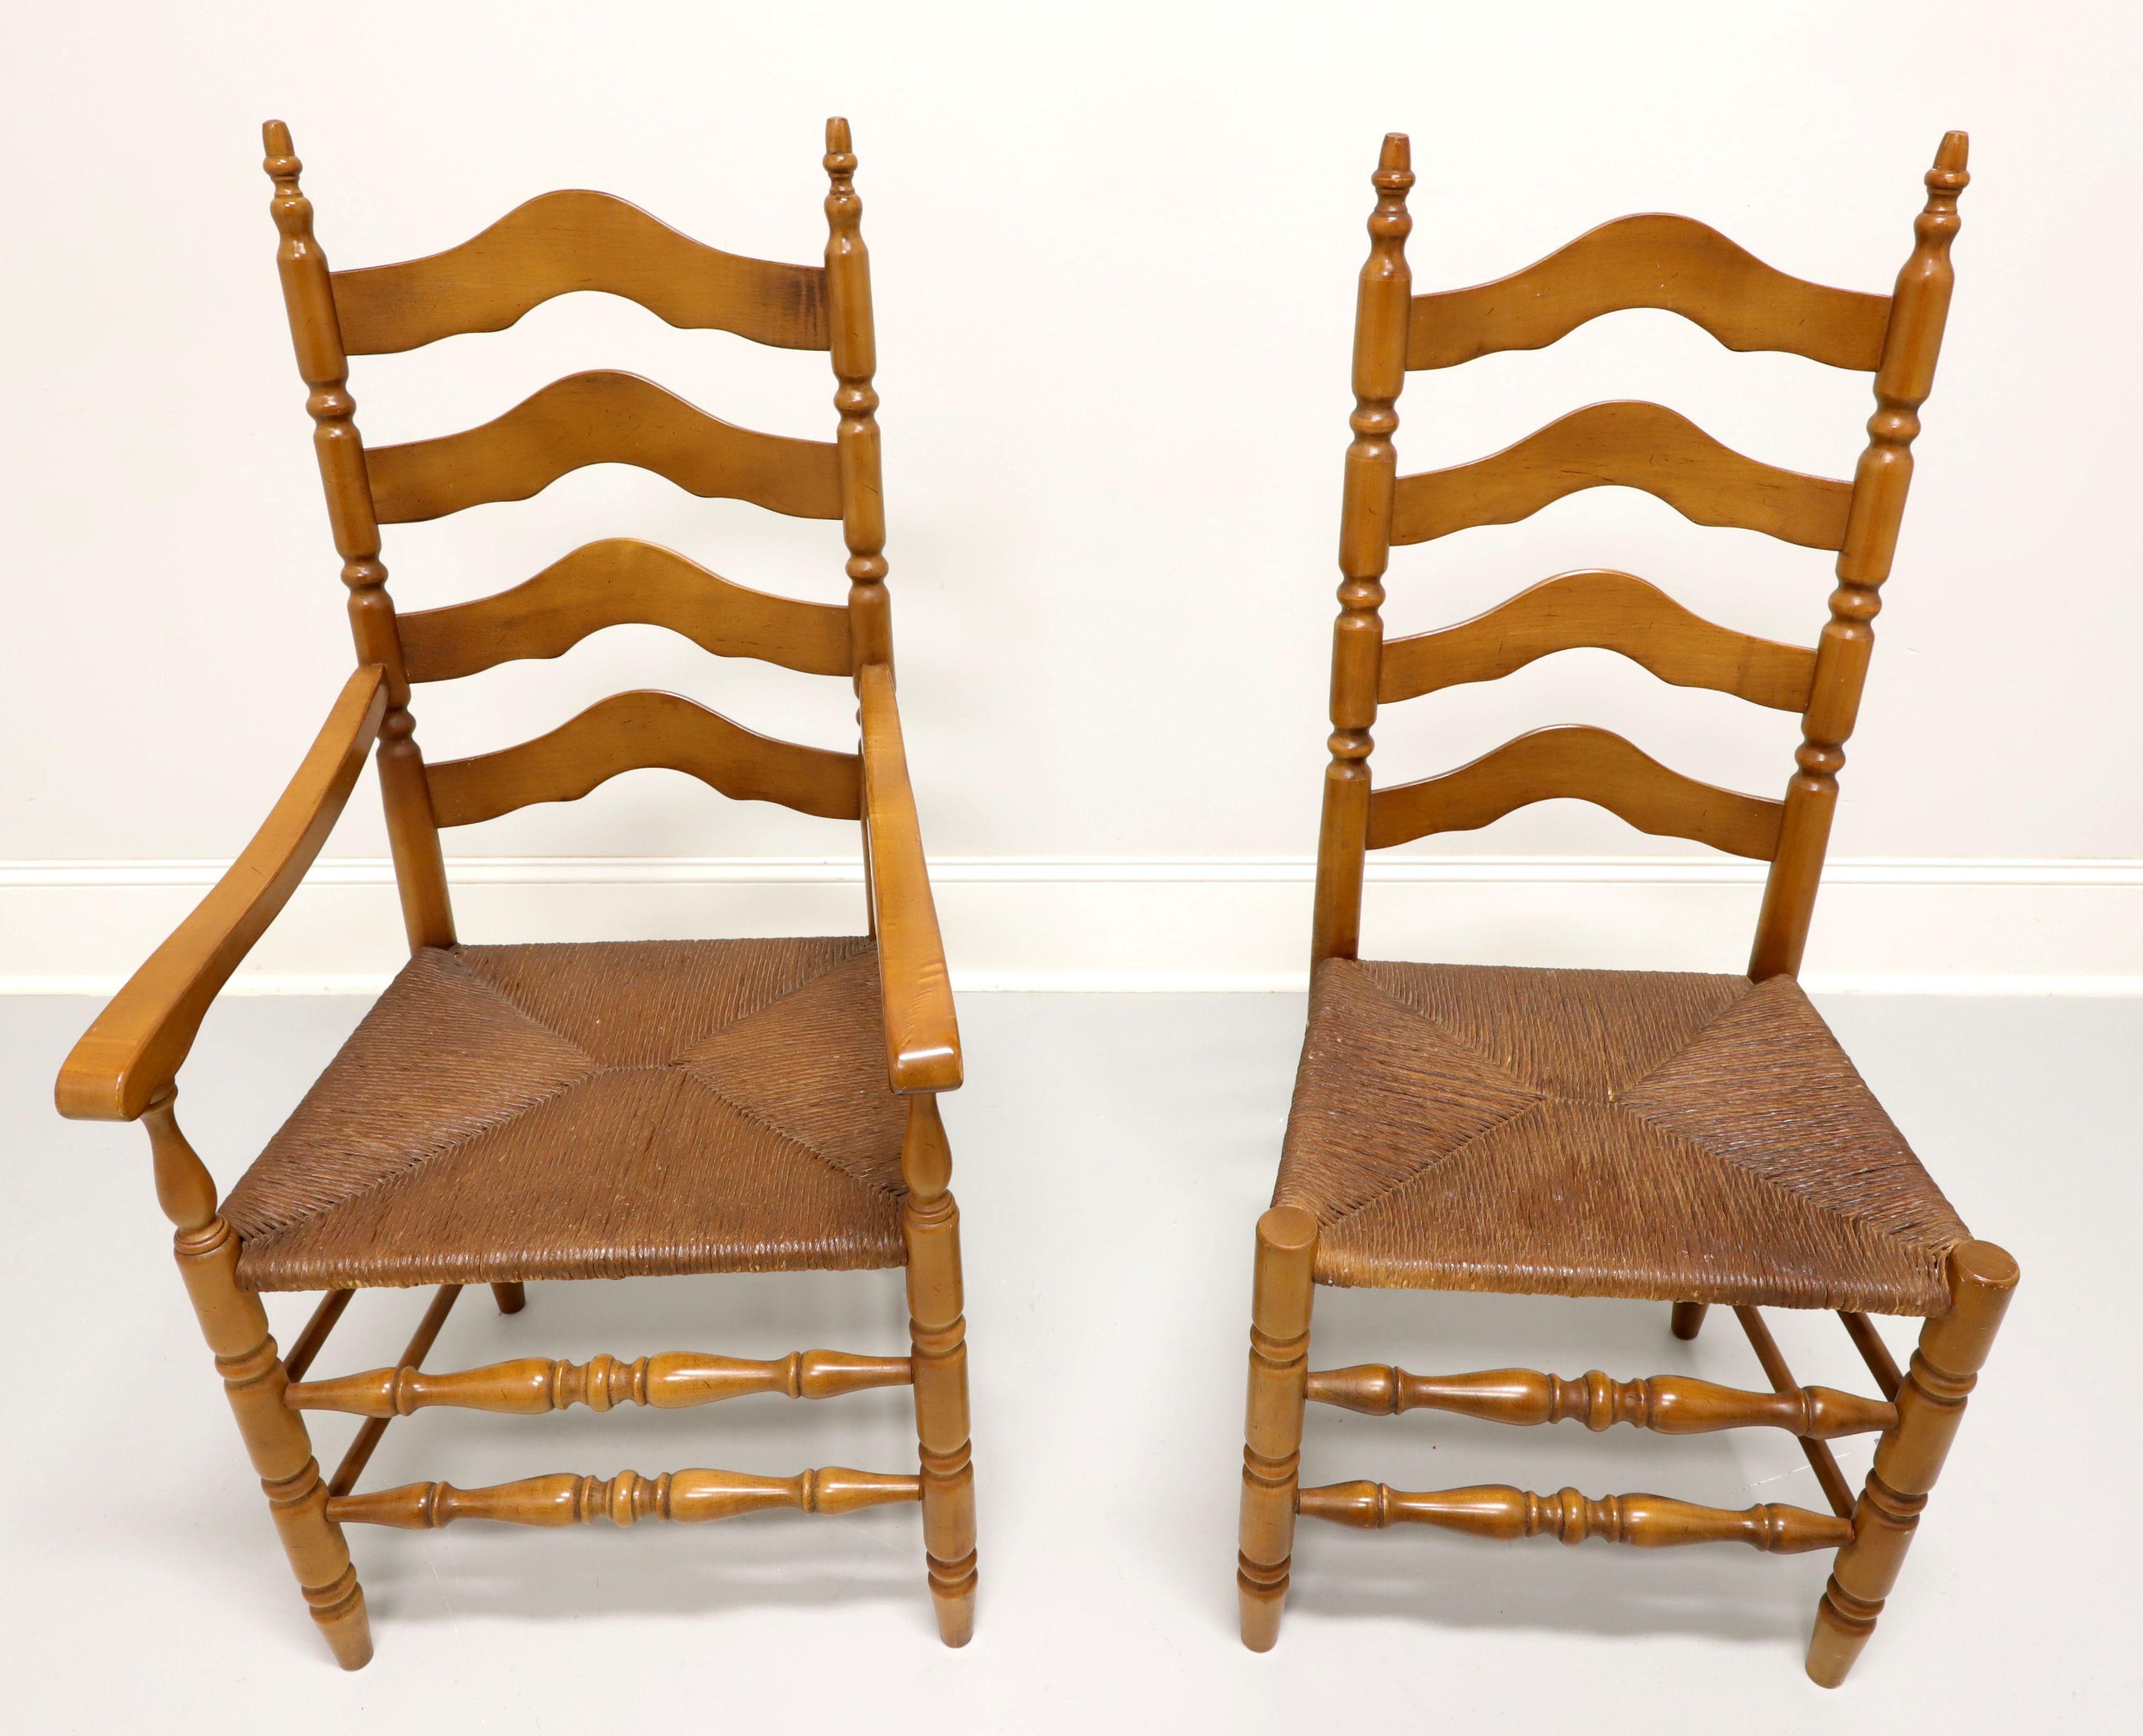 A pair of Cottage / Farmhouse style dining chairs, one armchair and one side chair, unbranded, similar in quality to Ethan Allen. Maple with carved arched ladder back design, curved arms with turned supports to armchair, rush seats, turned front